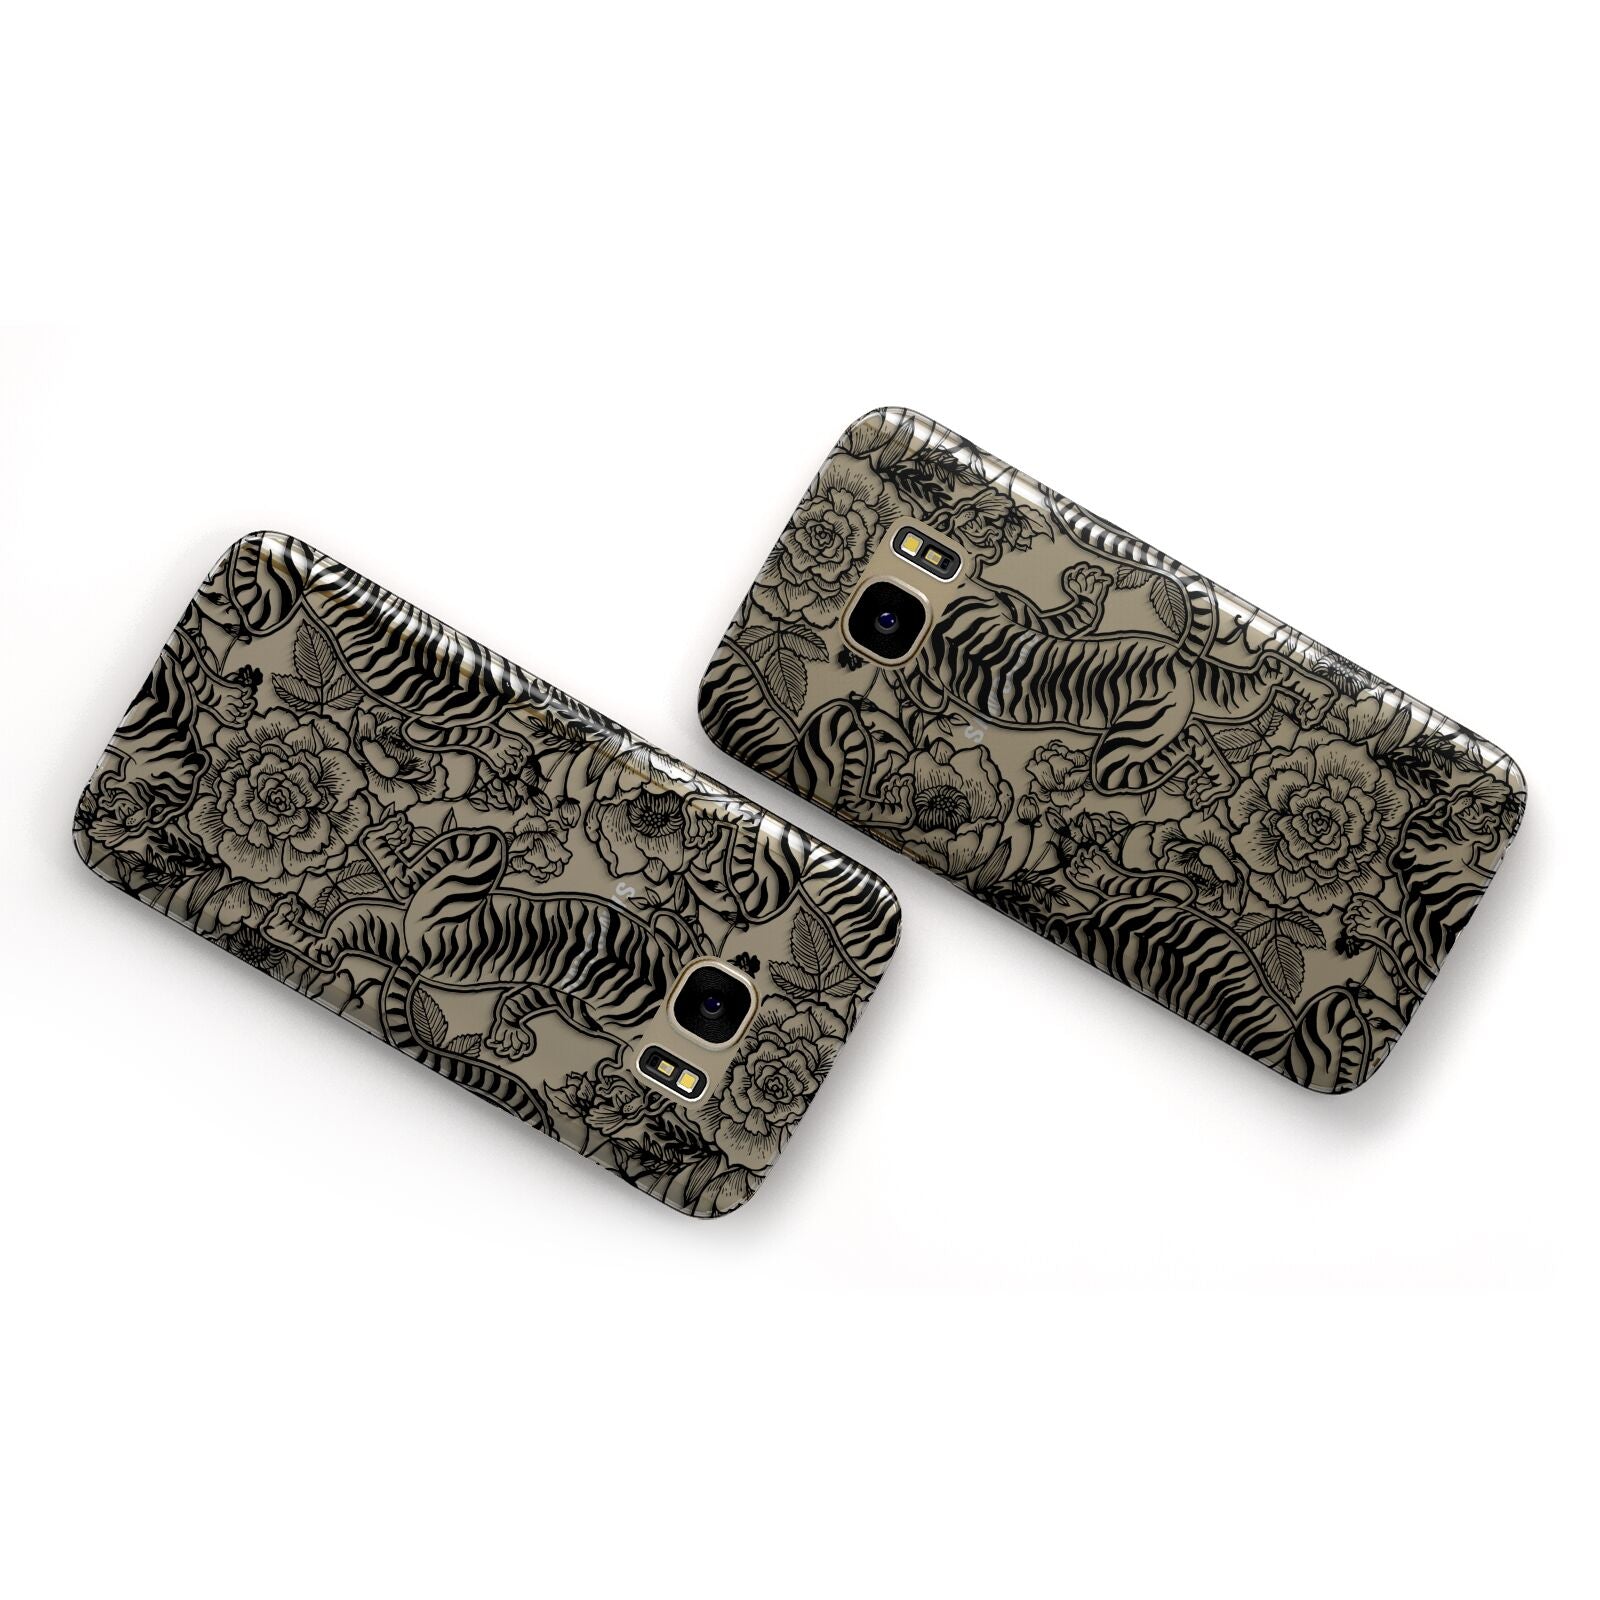 Chinese Tiger Samsung Galaxy Case Flat Overview